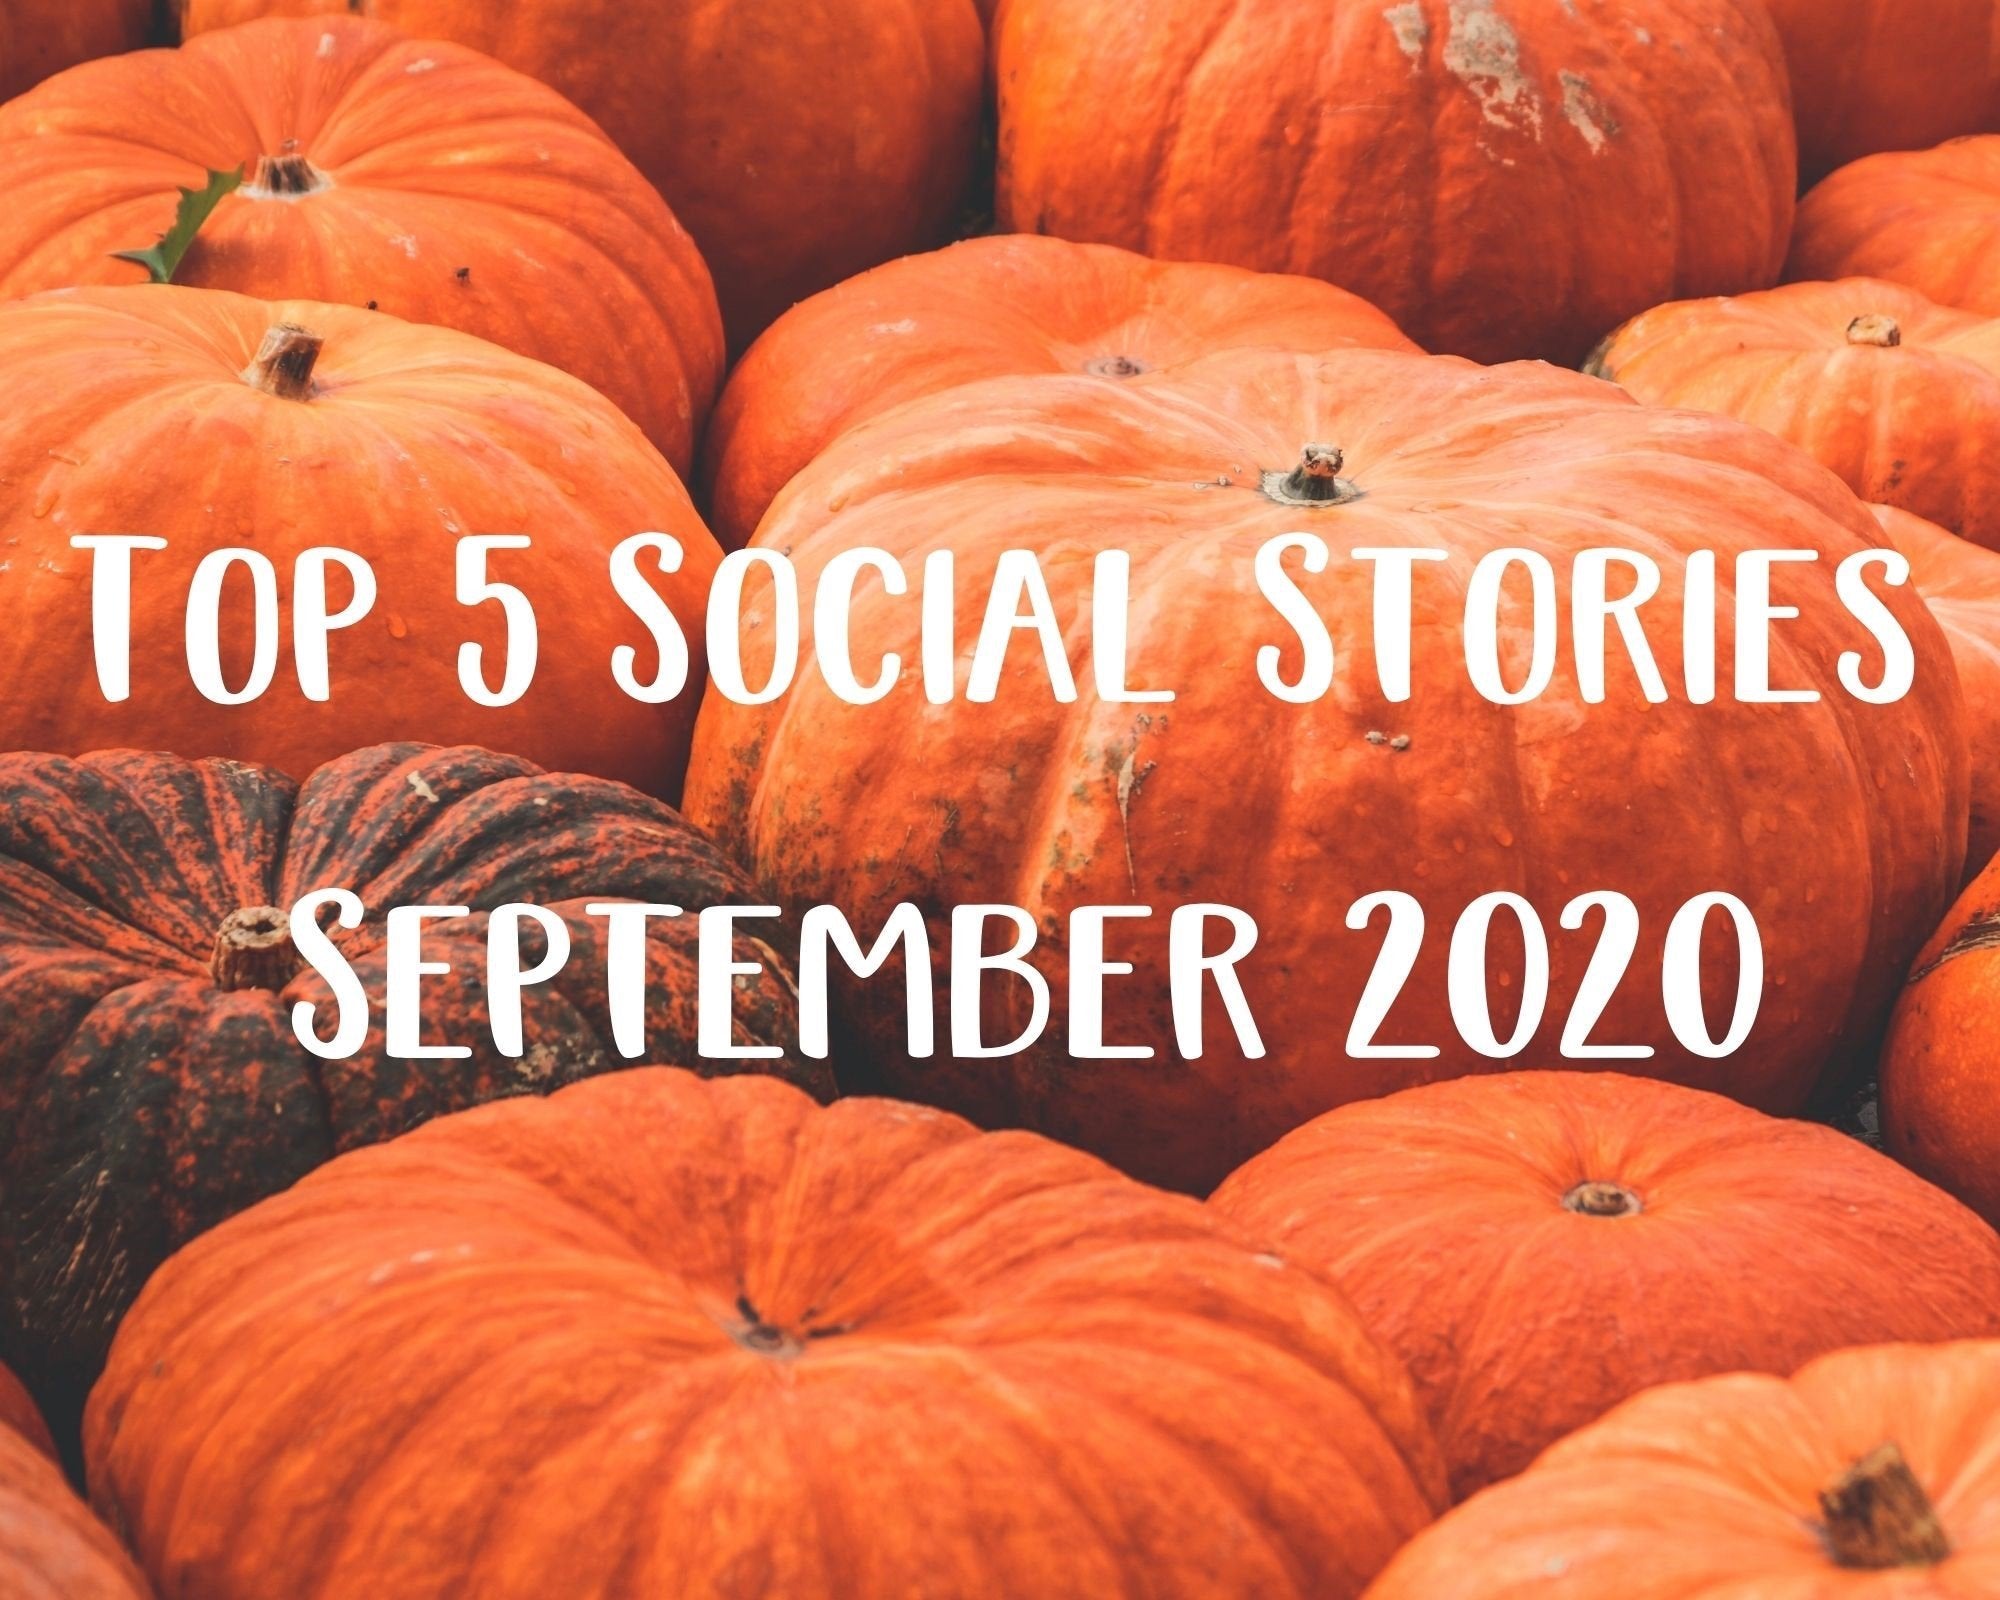 Our Top 5 Social Stories for September 2020 | Social Stories Club